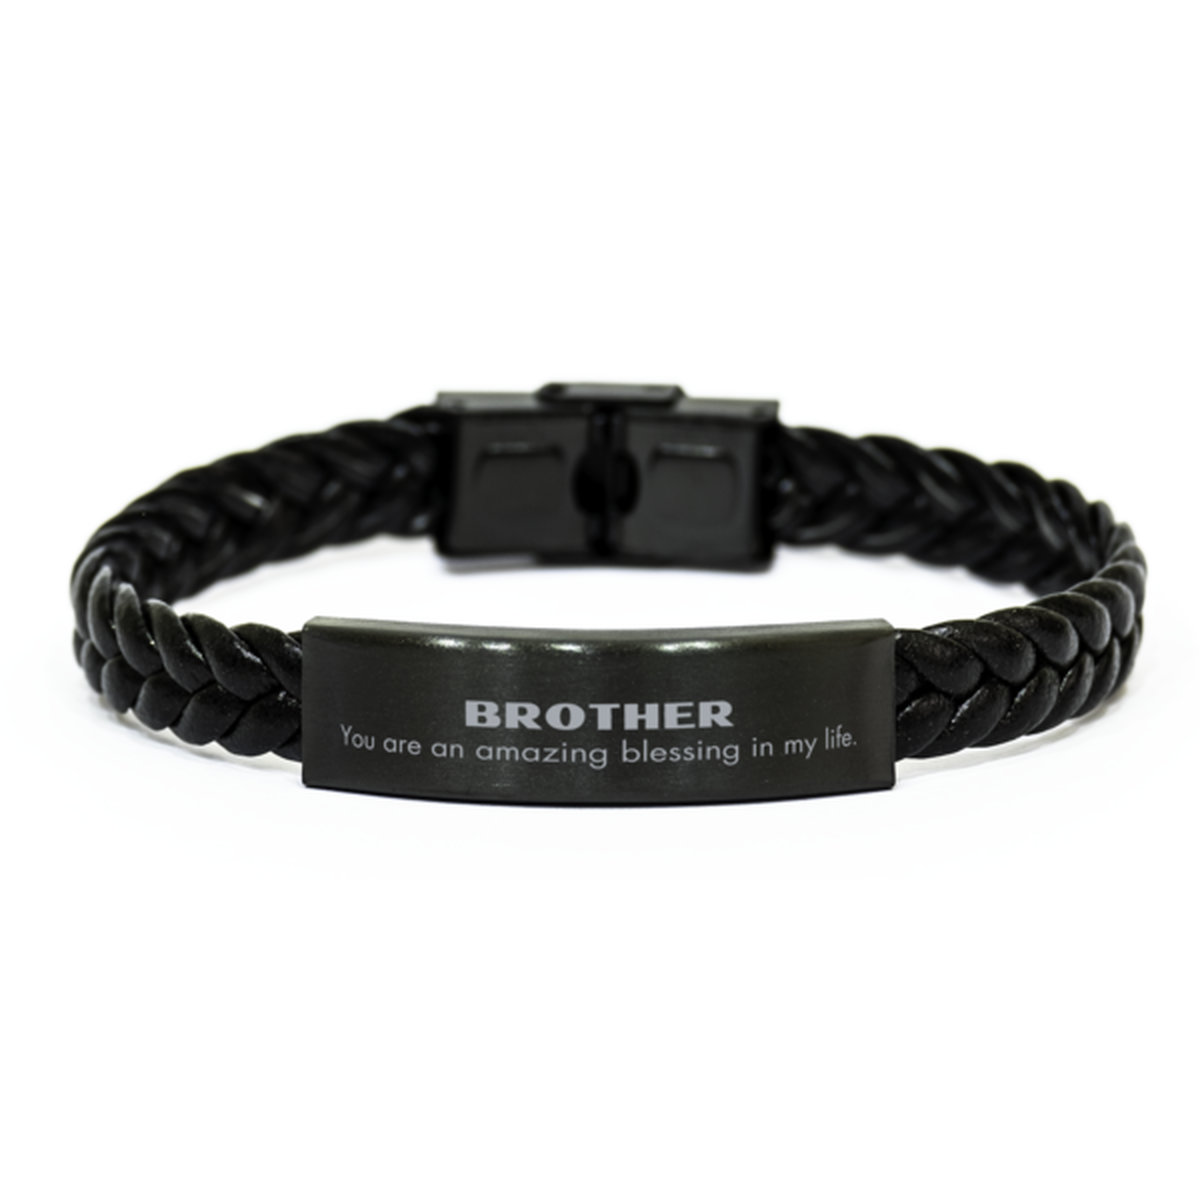 Brother Braided Leather Bracelet, You are an amazing blessing in my life, Thank You Gifts For Brother, Inspirational Birthday Christmas Unique Gifts For Brother